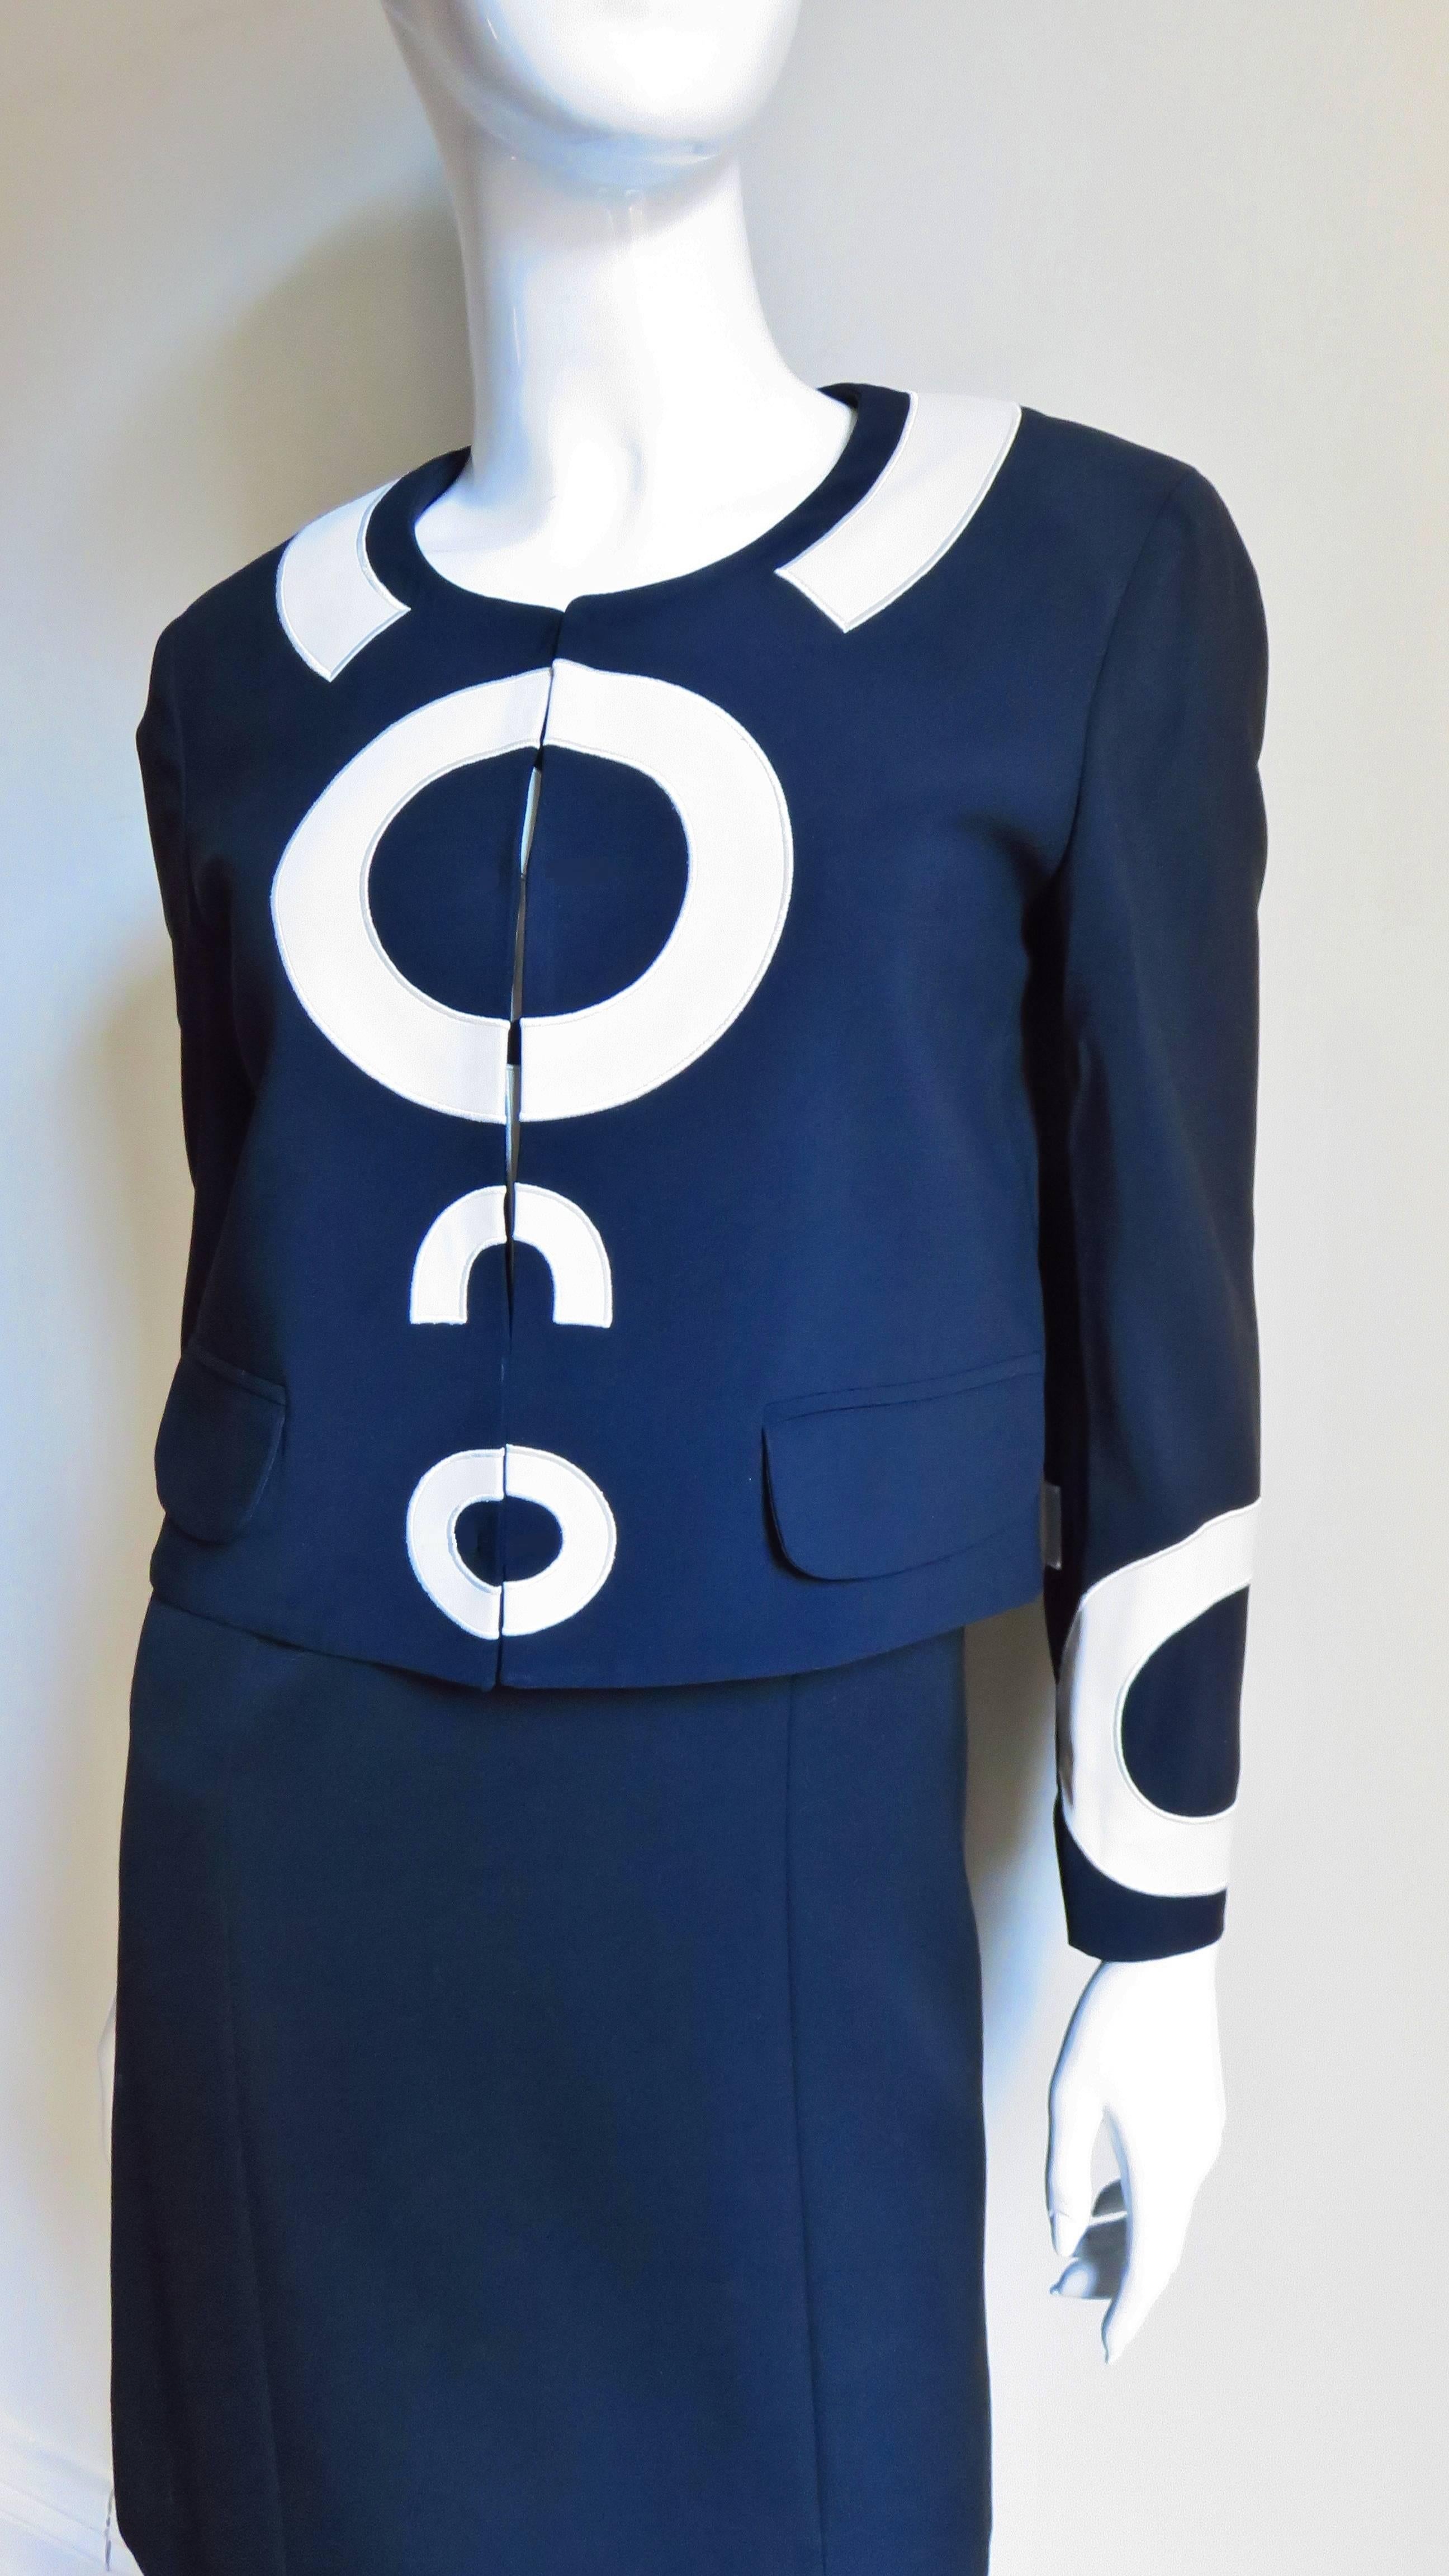 Moschino Couture Letter Applique Dress and Mod Geometric Jacket 1